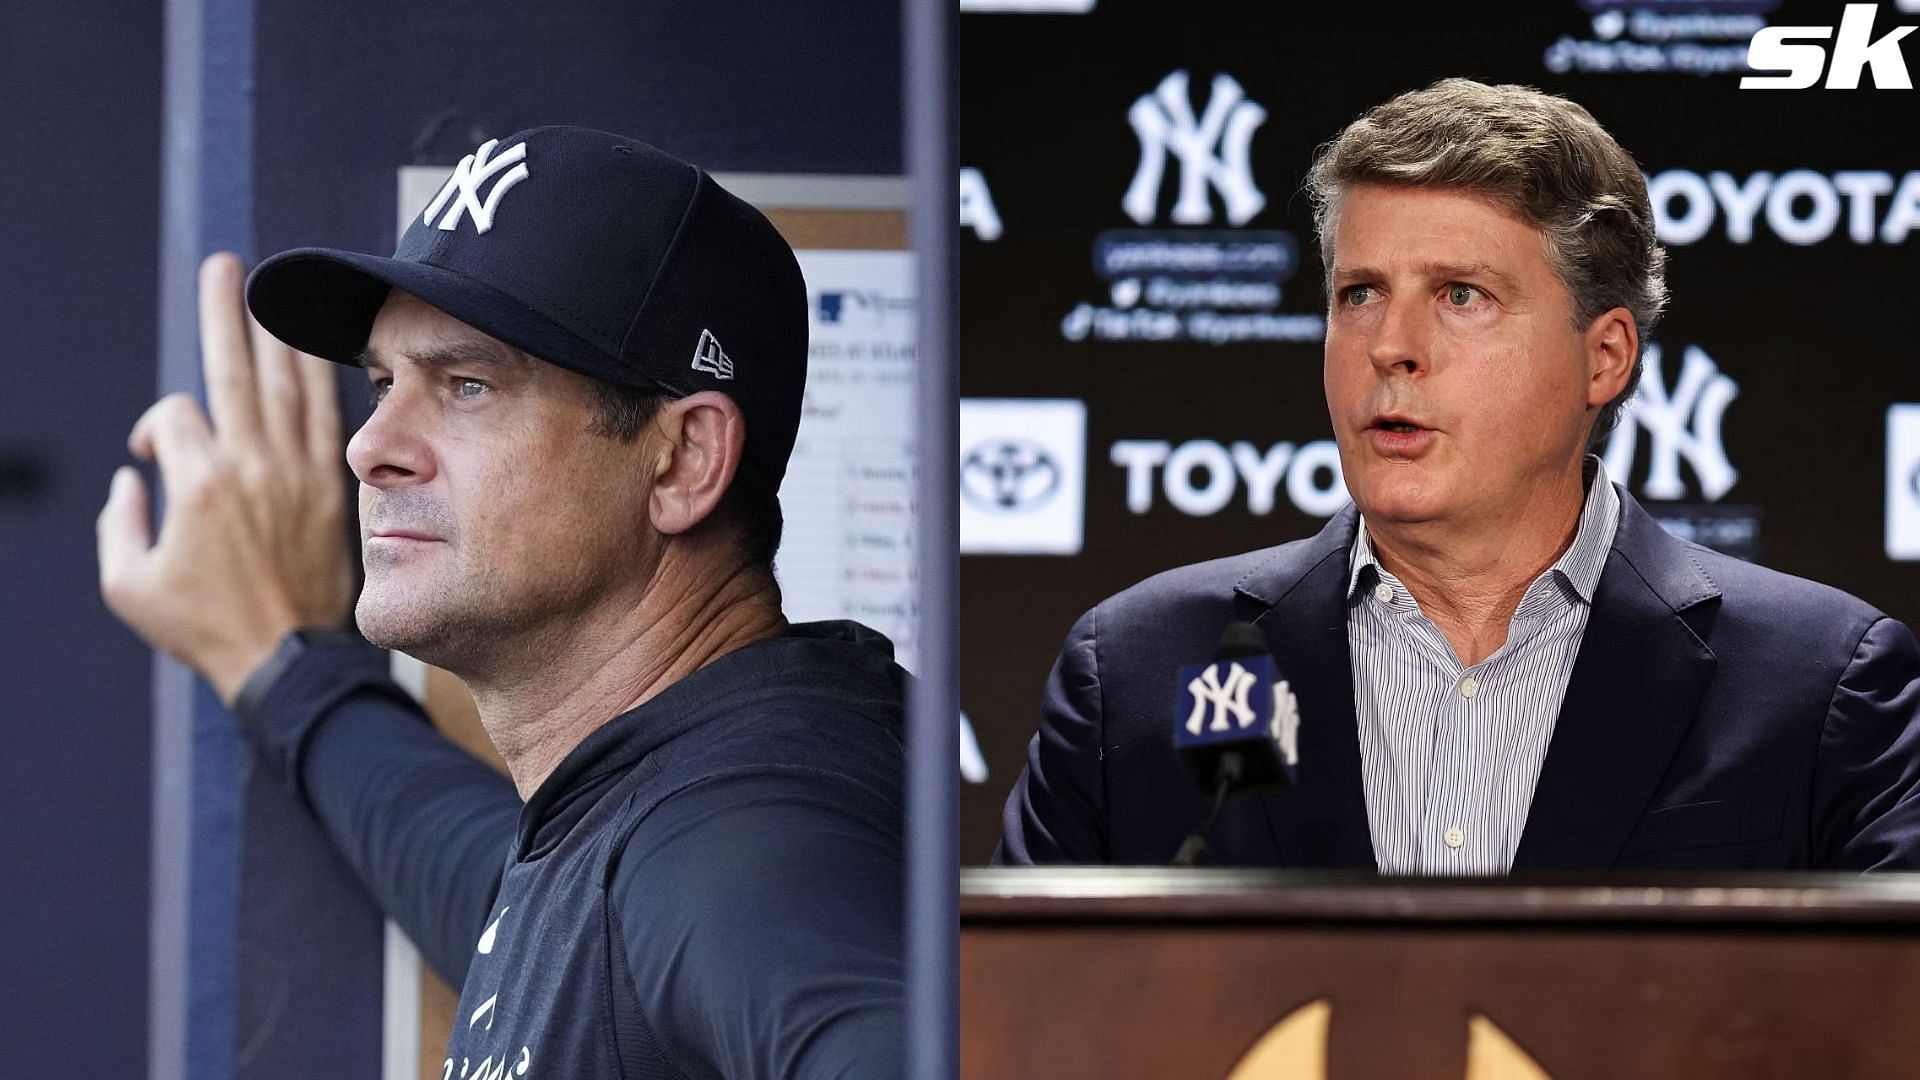 The Yankees may be running it back with Aaron Boone and Brian